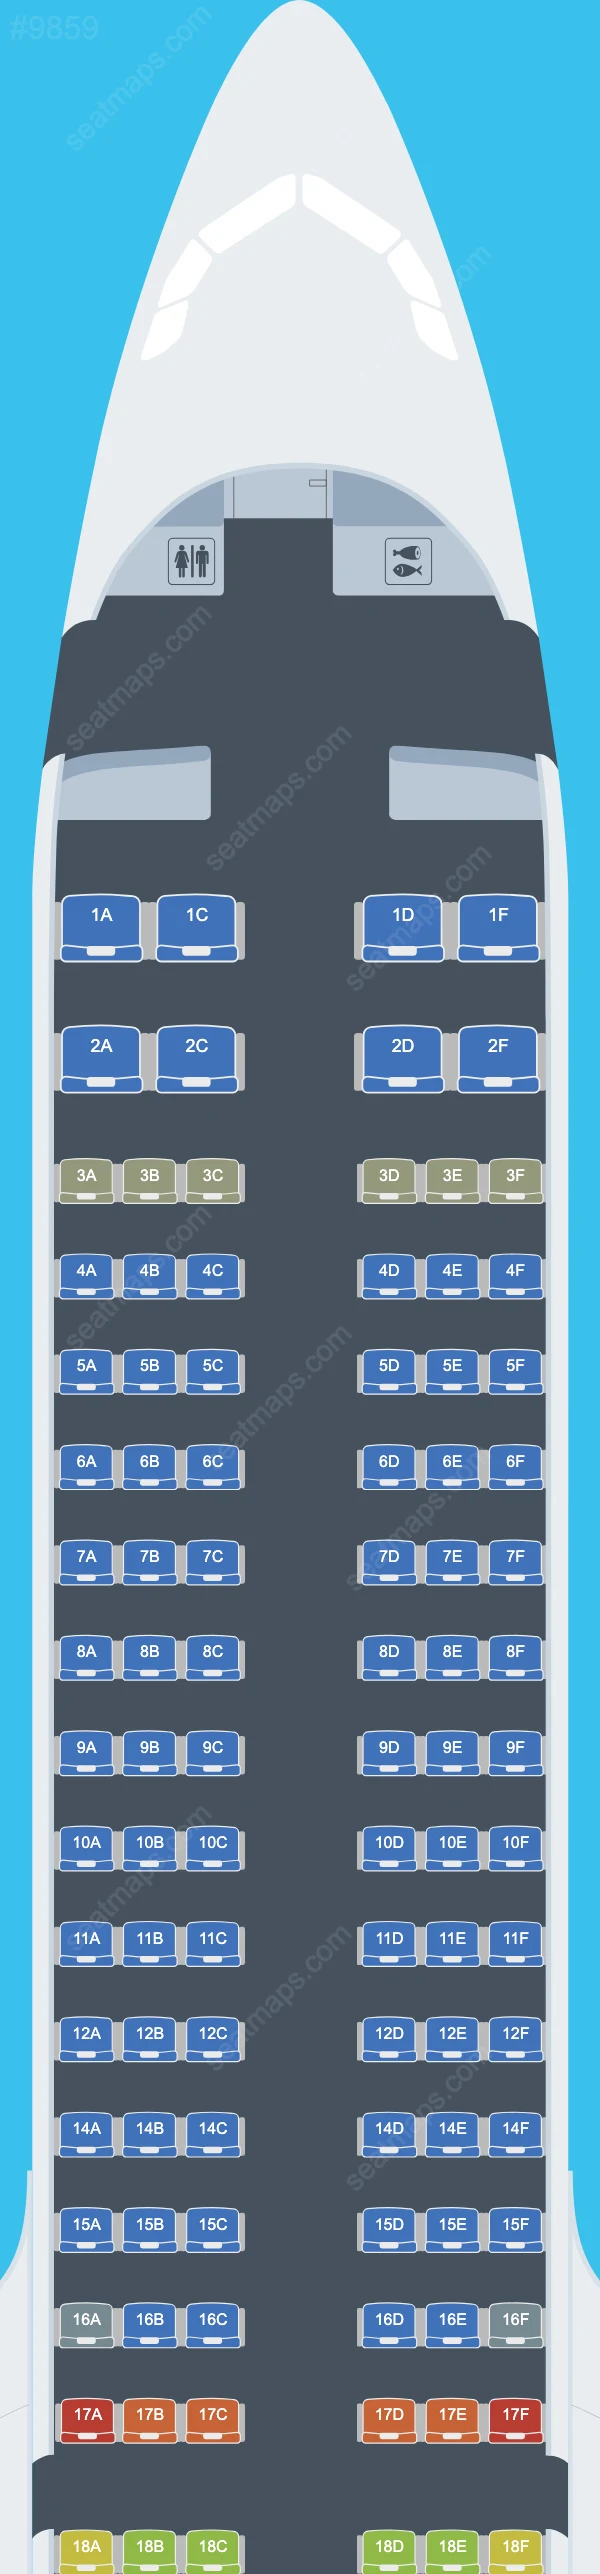 Bamboo Airways Airbus A321 Seat Maps A321-200neo